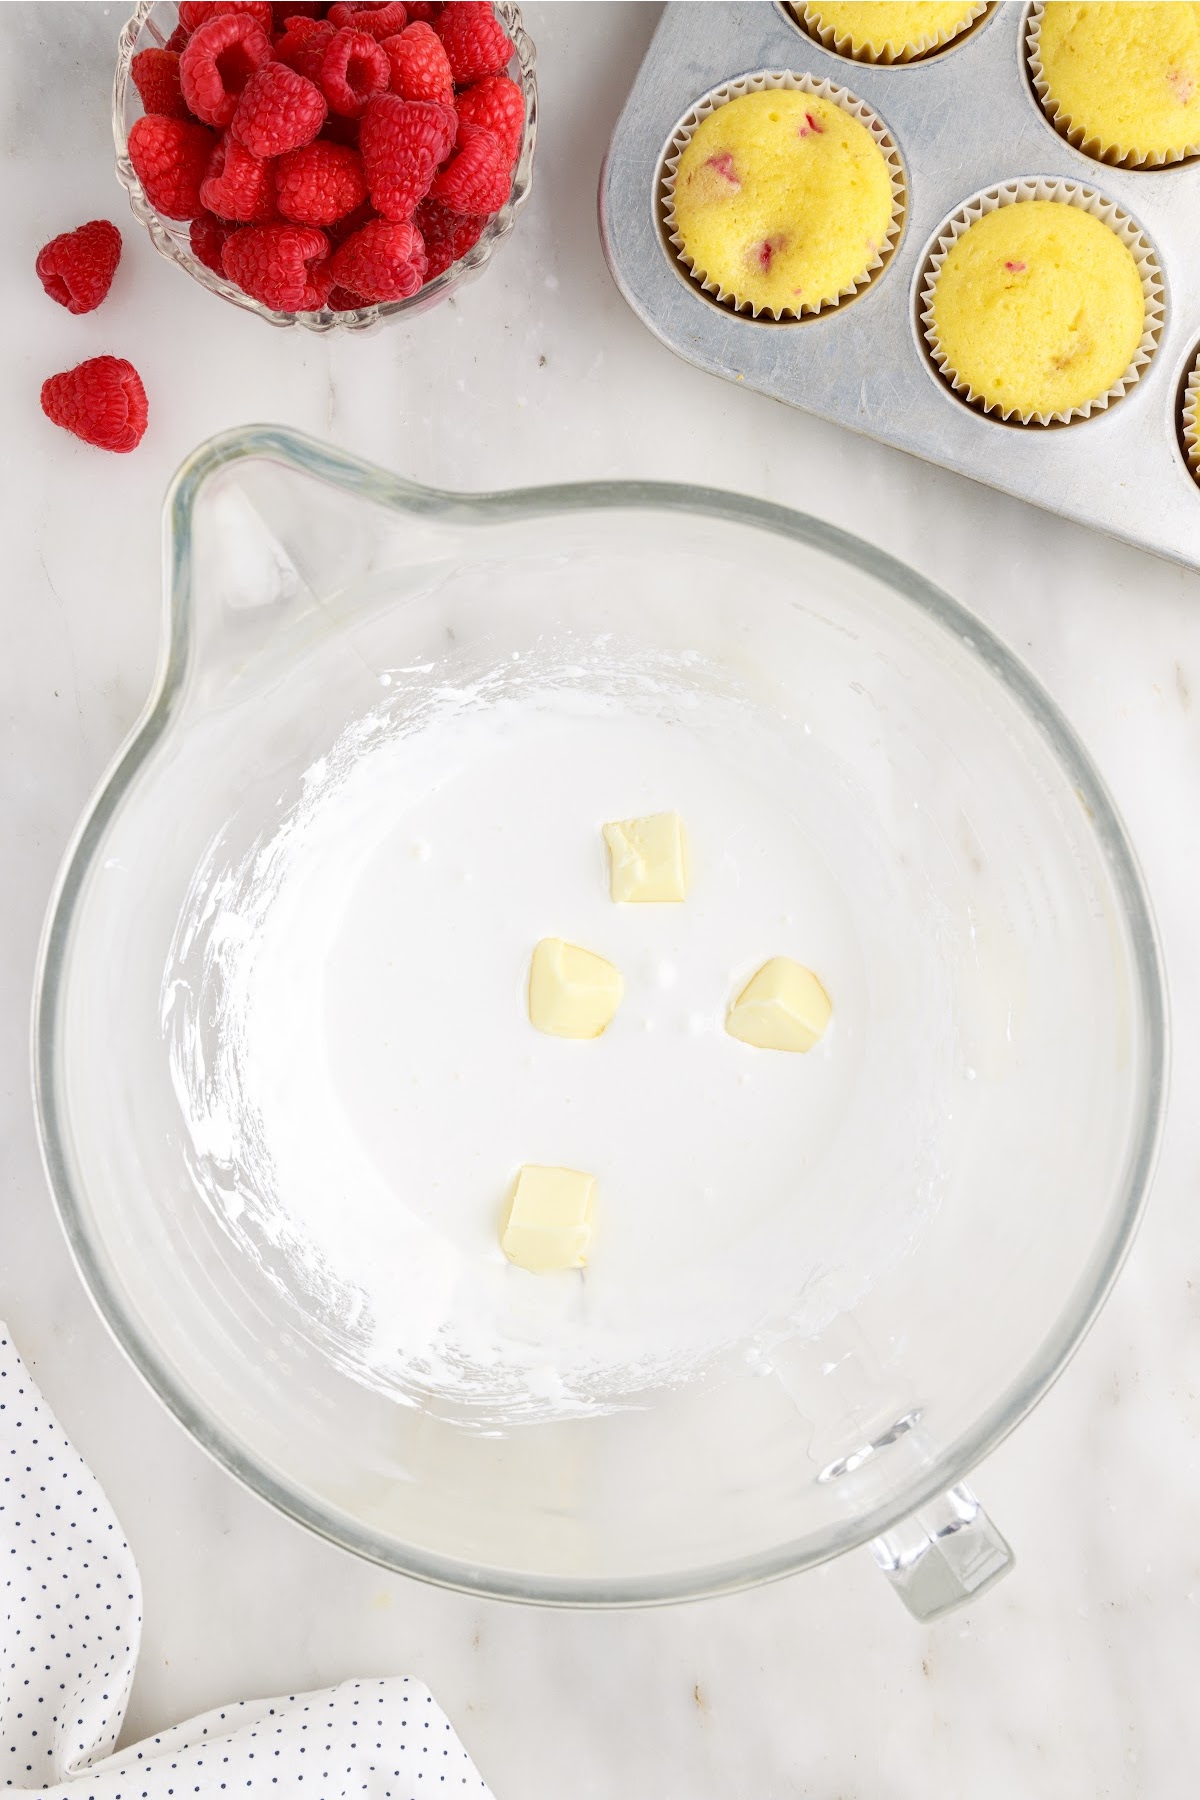 Butter added to whipped marshmallow cream.